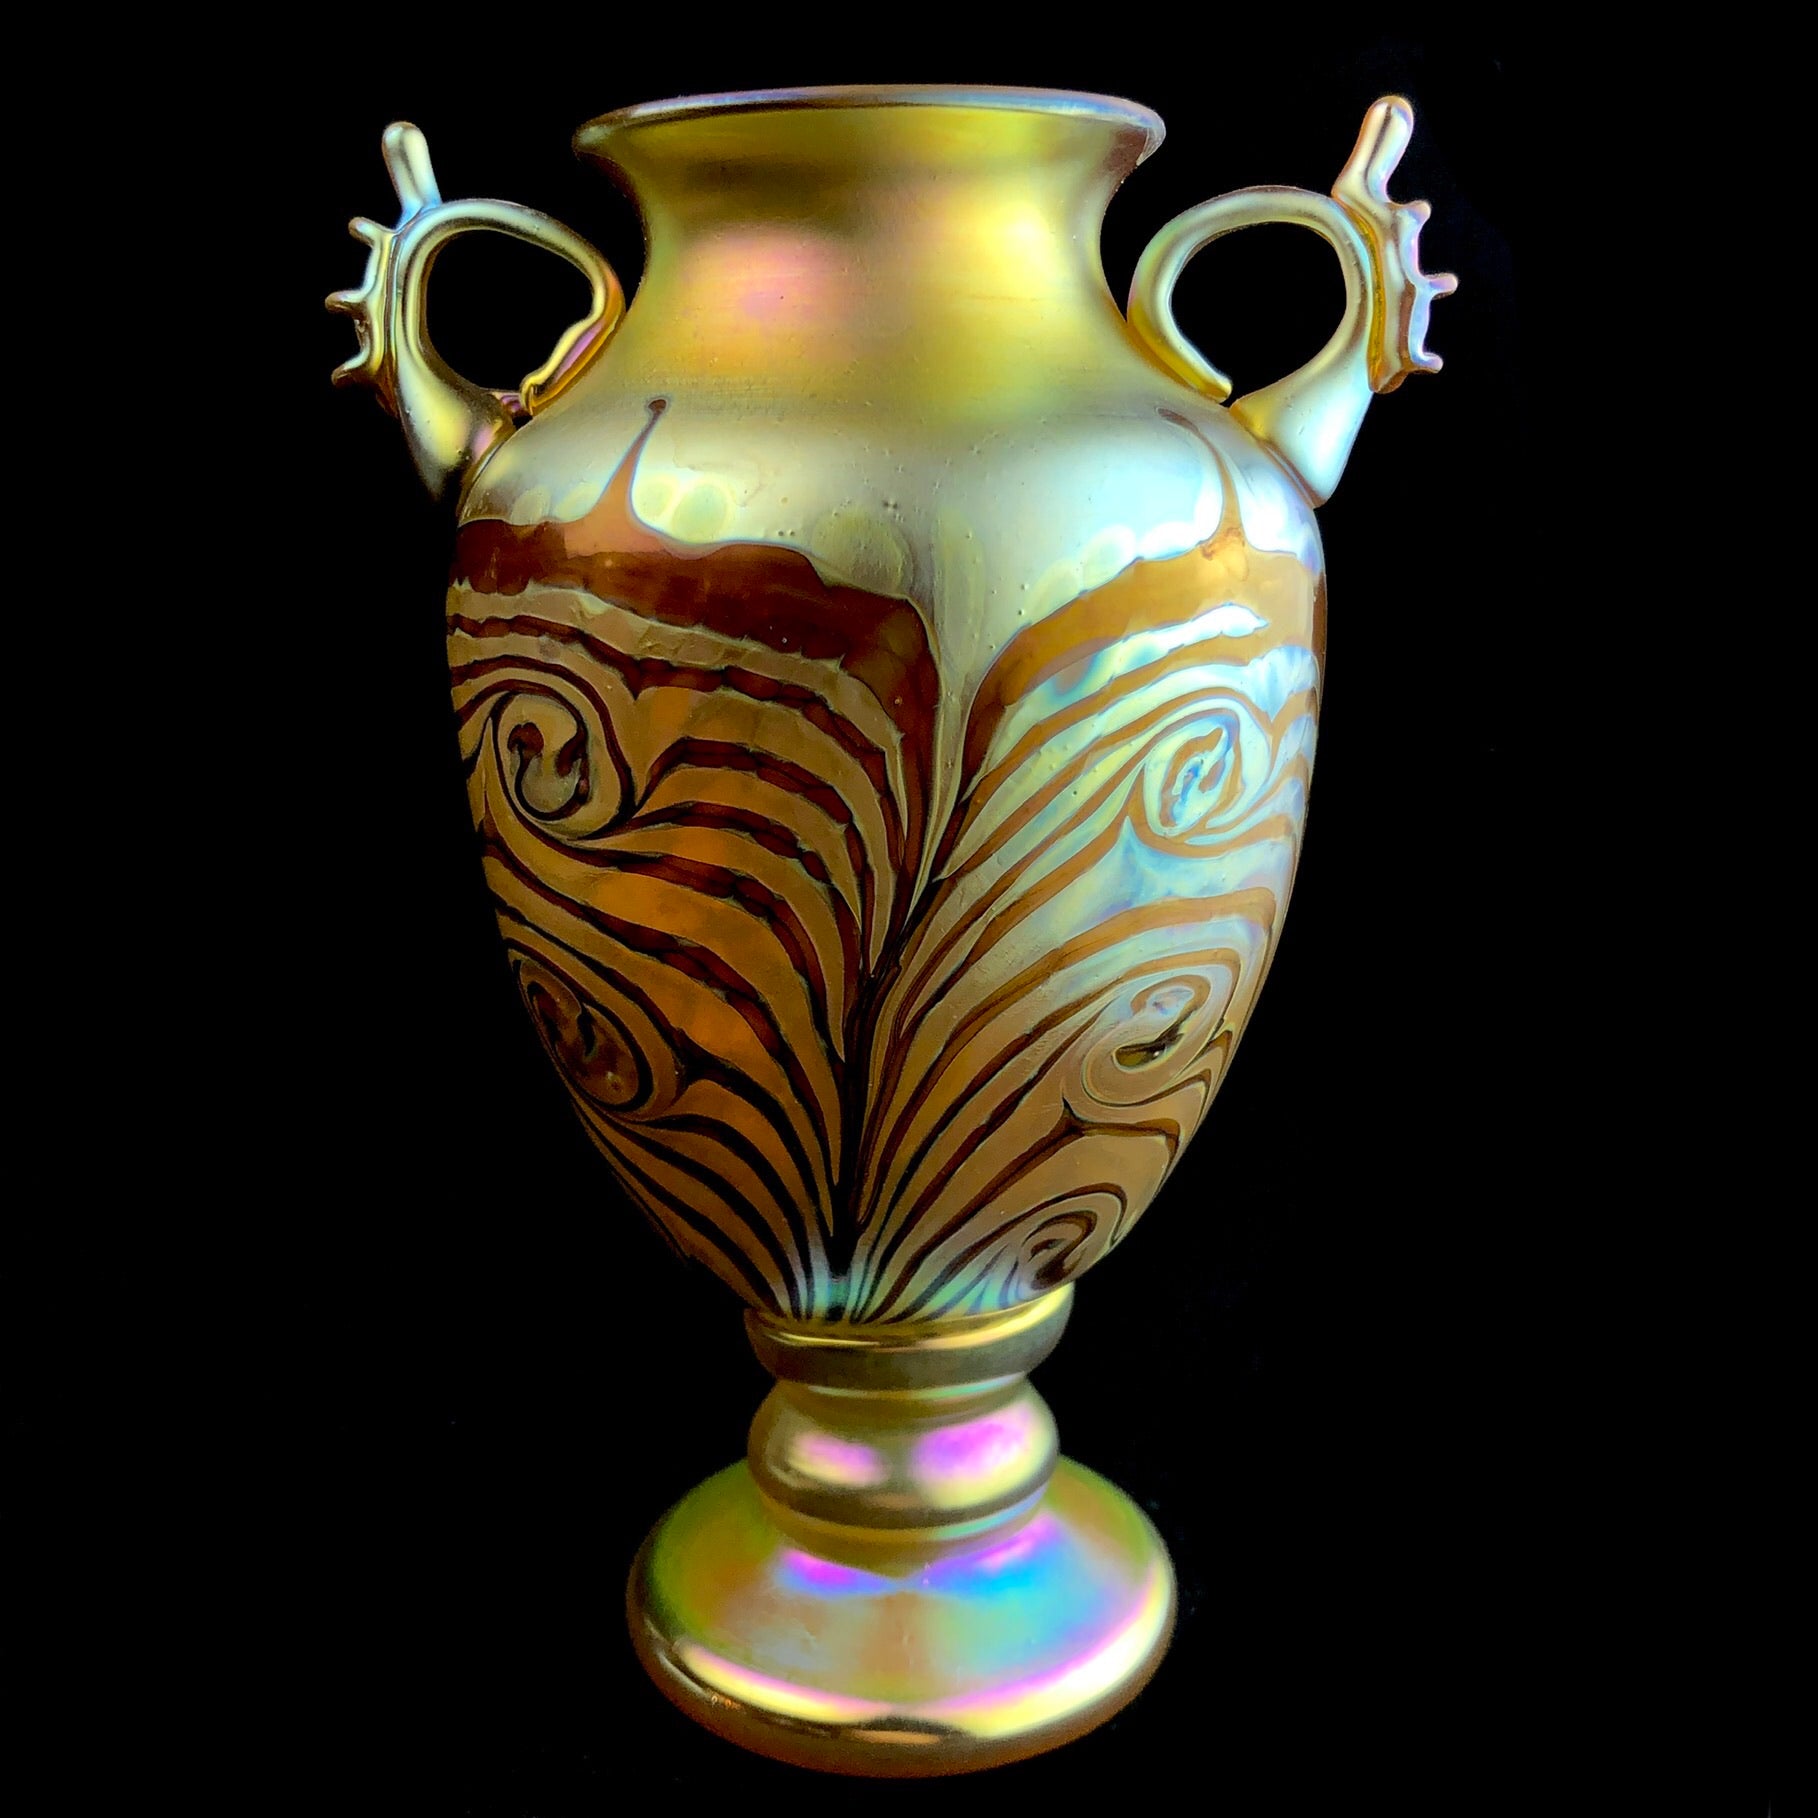 Front view of iridescent yellow glass vase shaped like an urn with small handles toward the top